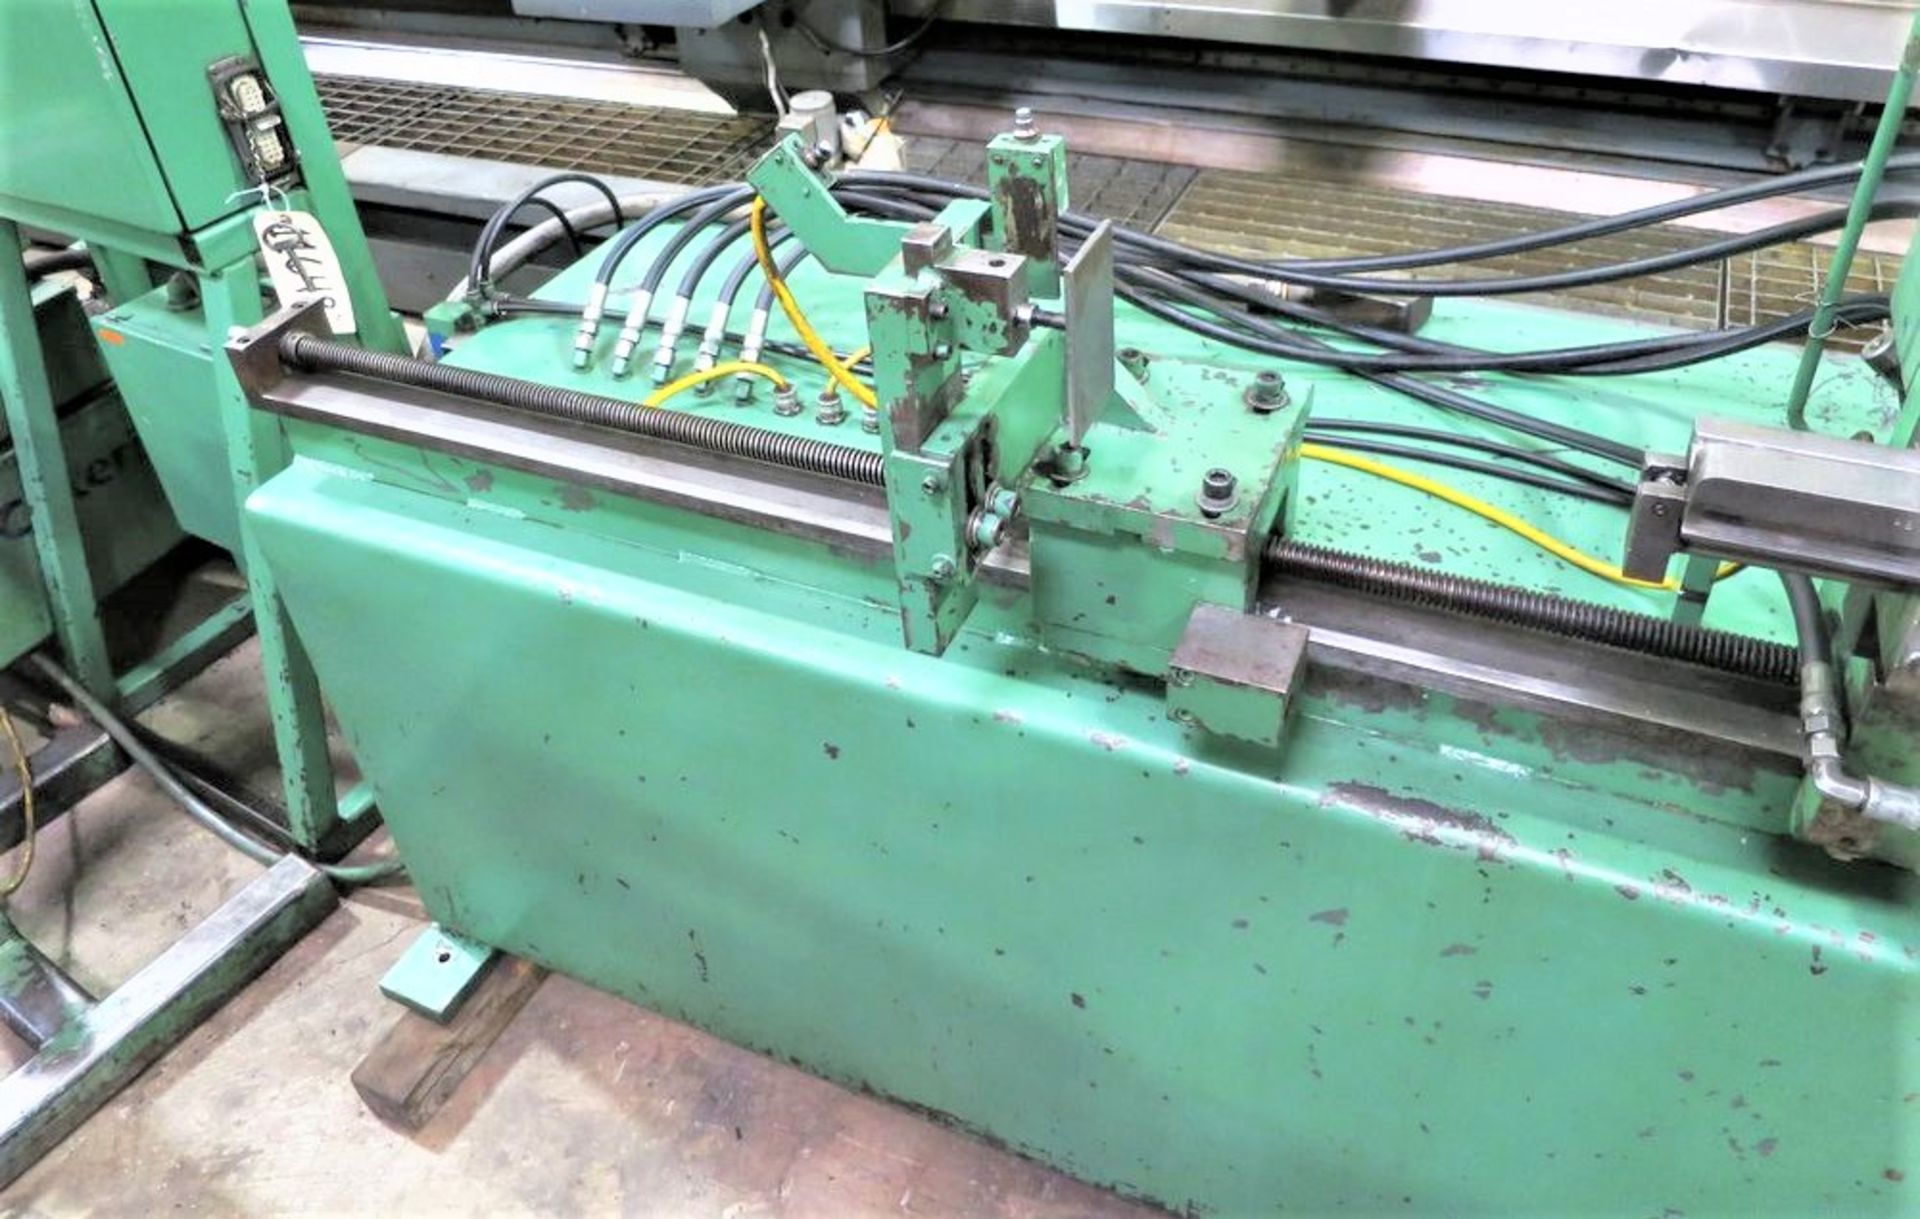 Criterion Model 125-T-0 (26,000) Twin Head Hydraulic Tube Bender, S/N 11649 - Image 4 of 7